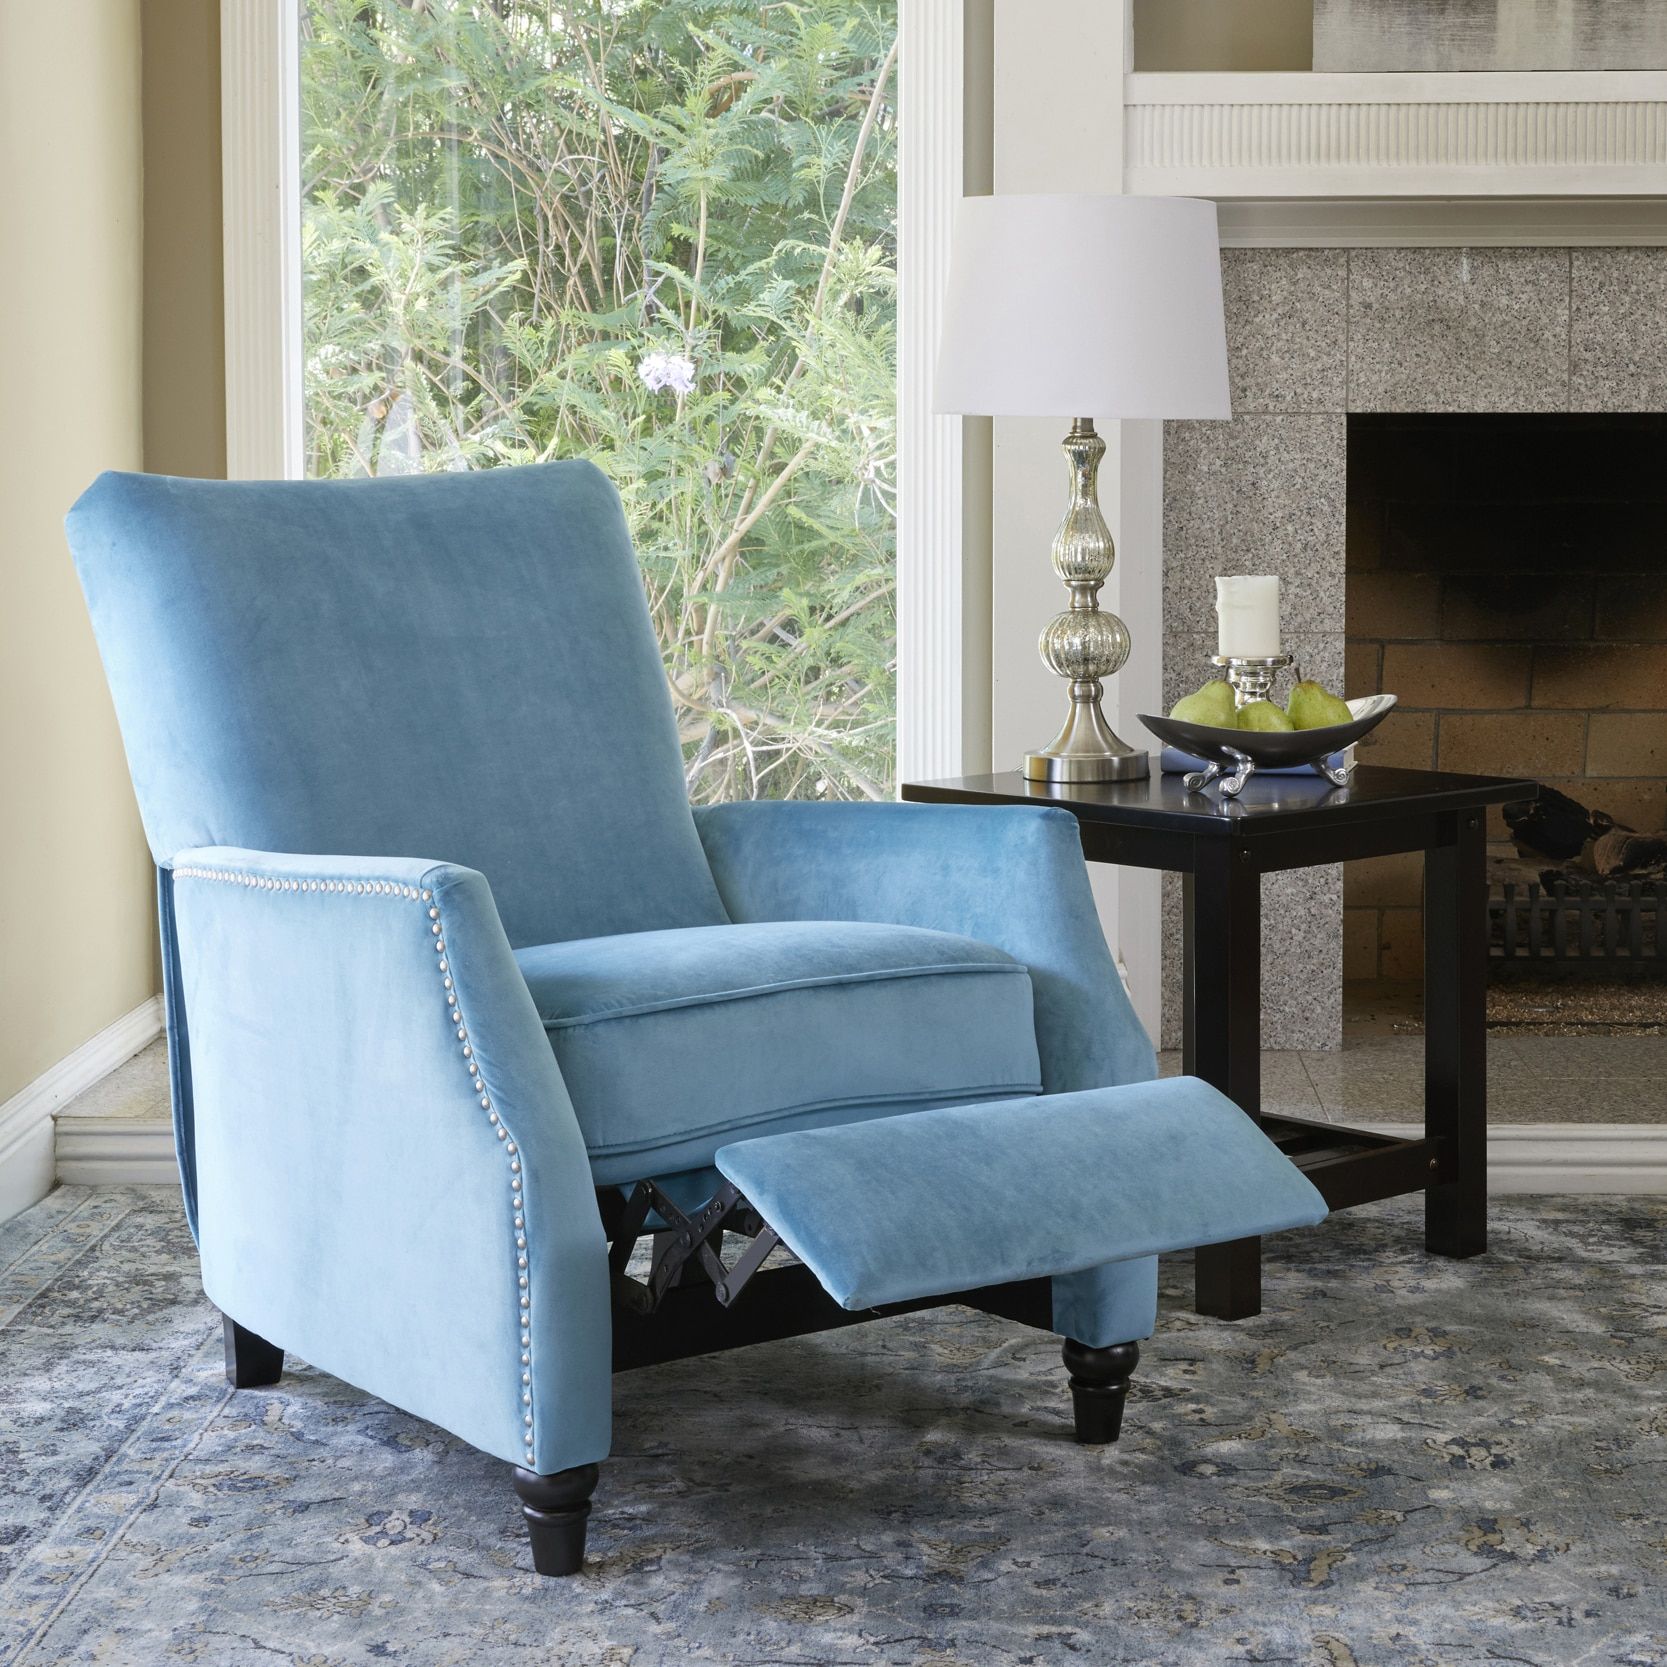 Shop Prolounger Turquoise Velvet Push Back Recliner Chair – Free With Regard To Modern Velvet Upholstered Recliner Chairs (Gallery 10 of 20)